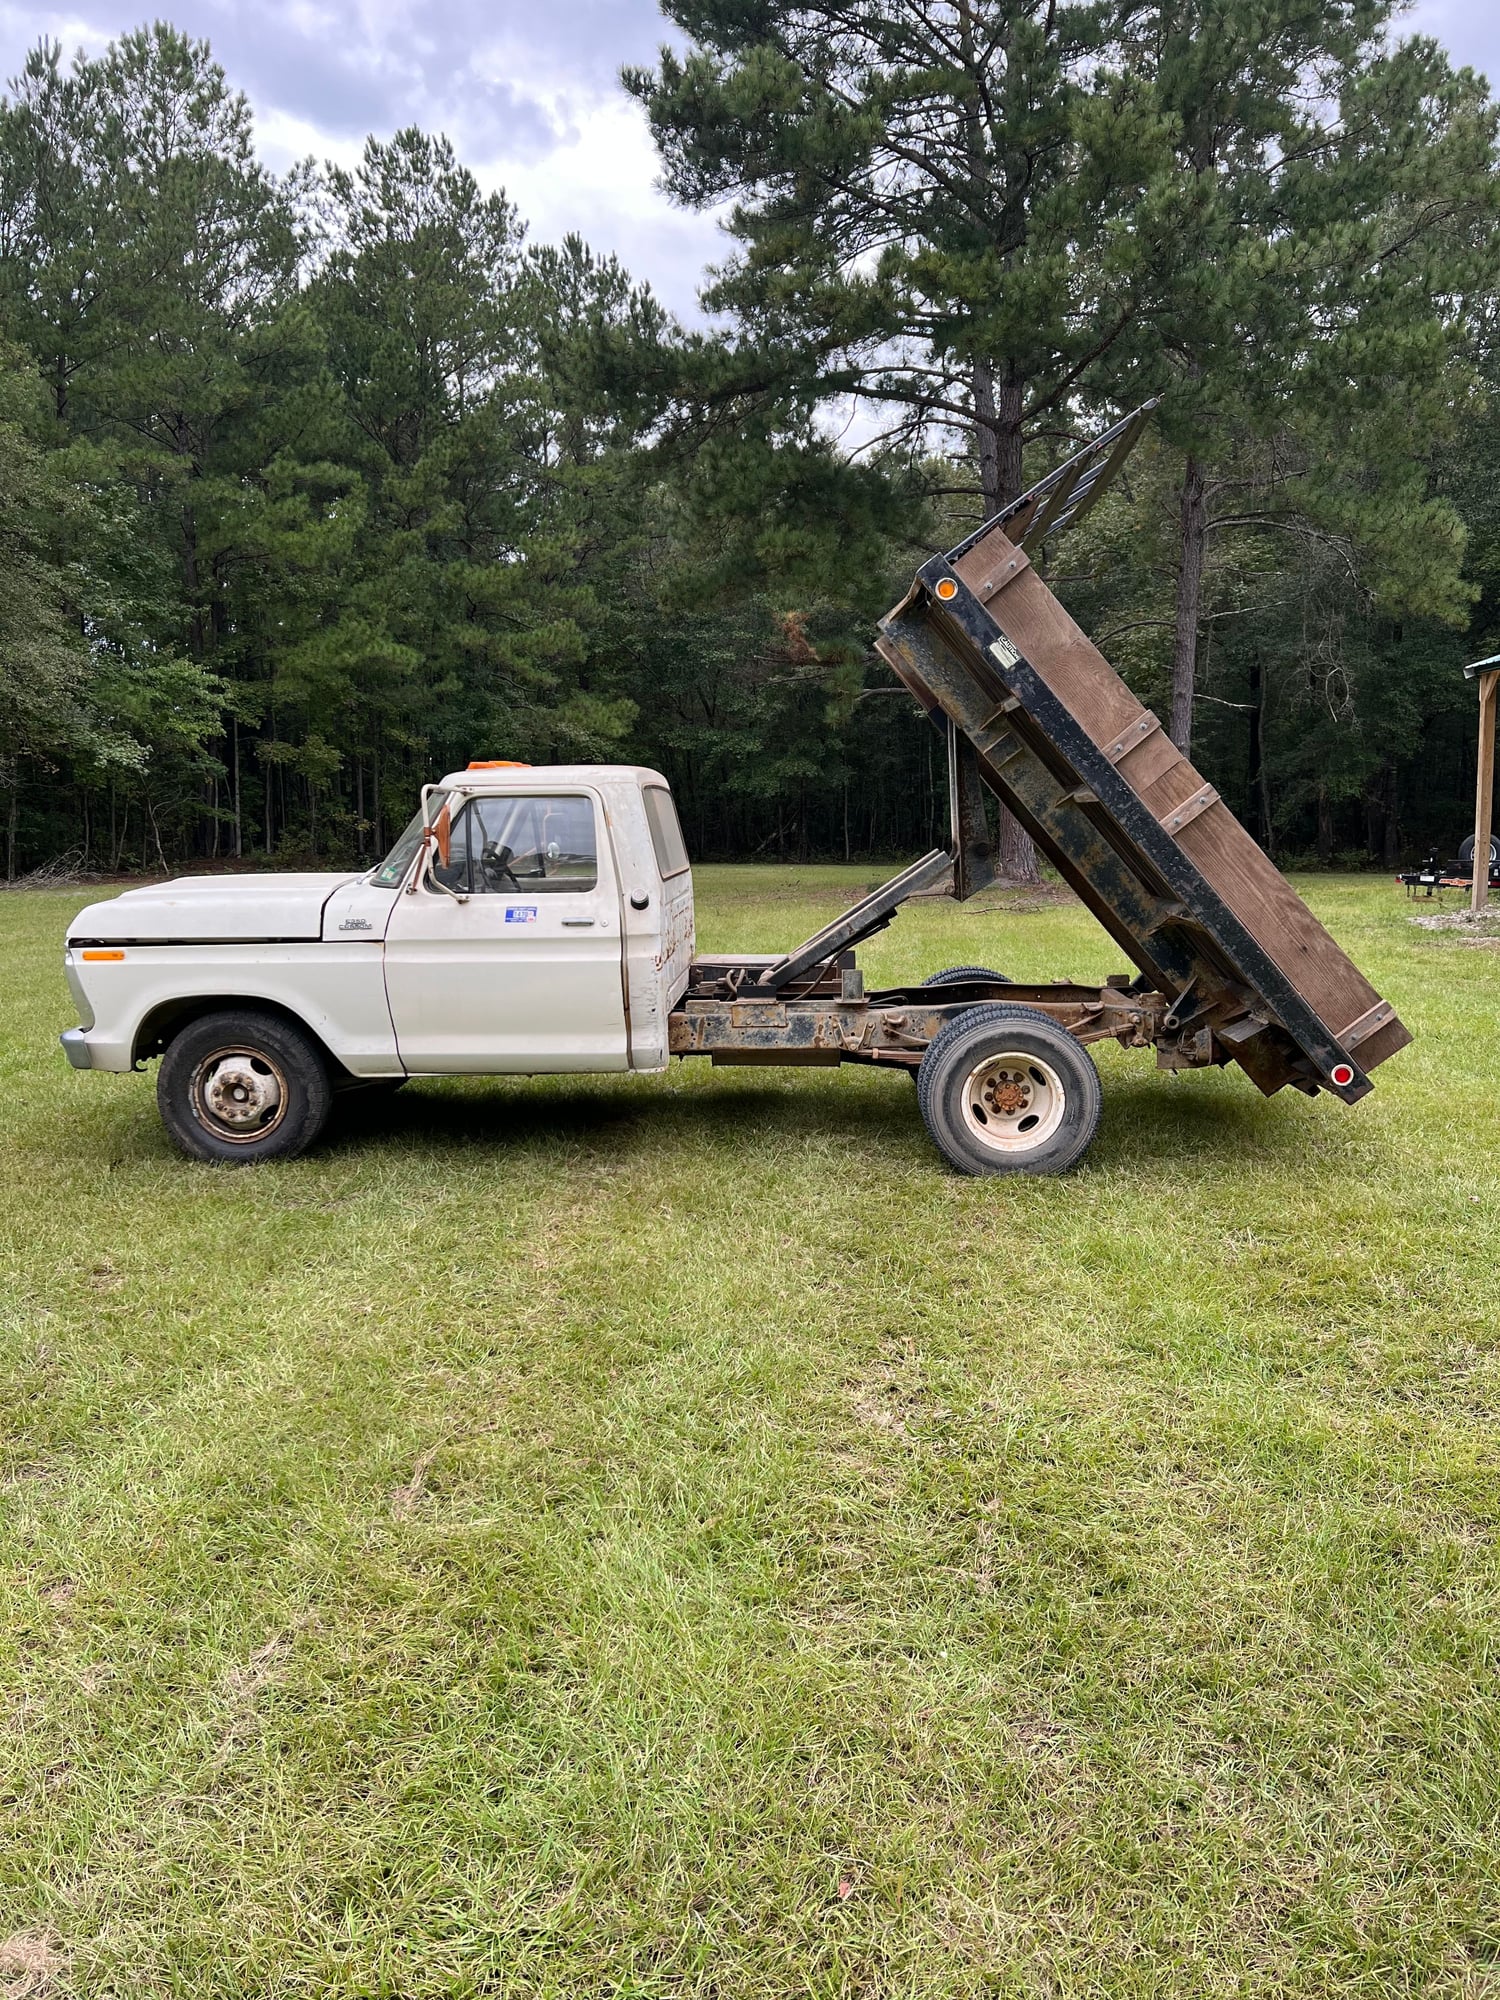 1977 Ford F-350 - 1977 F-350 flatbed dump.79k miles - Used - VIN F37SNY82494 - 79,800 Miles - 8 cyl - 2WD - Manual - Truck - White - Gadsden, SC 29052, United States